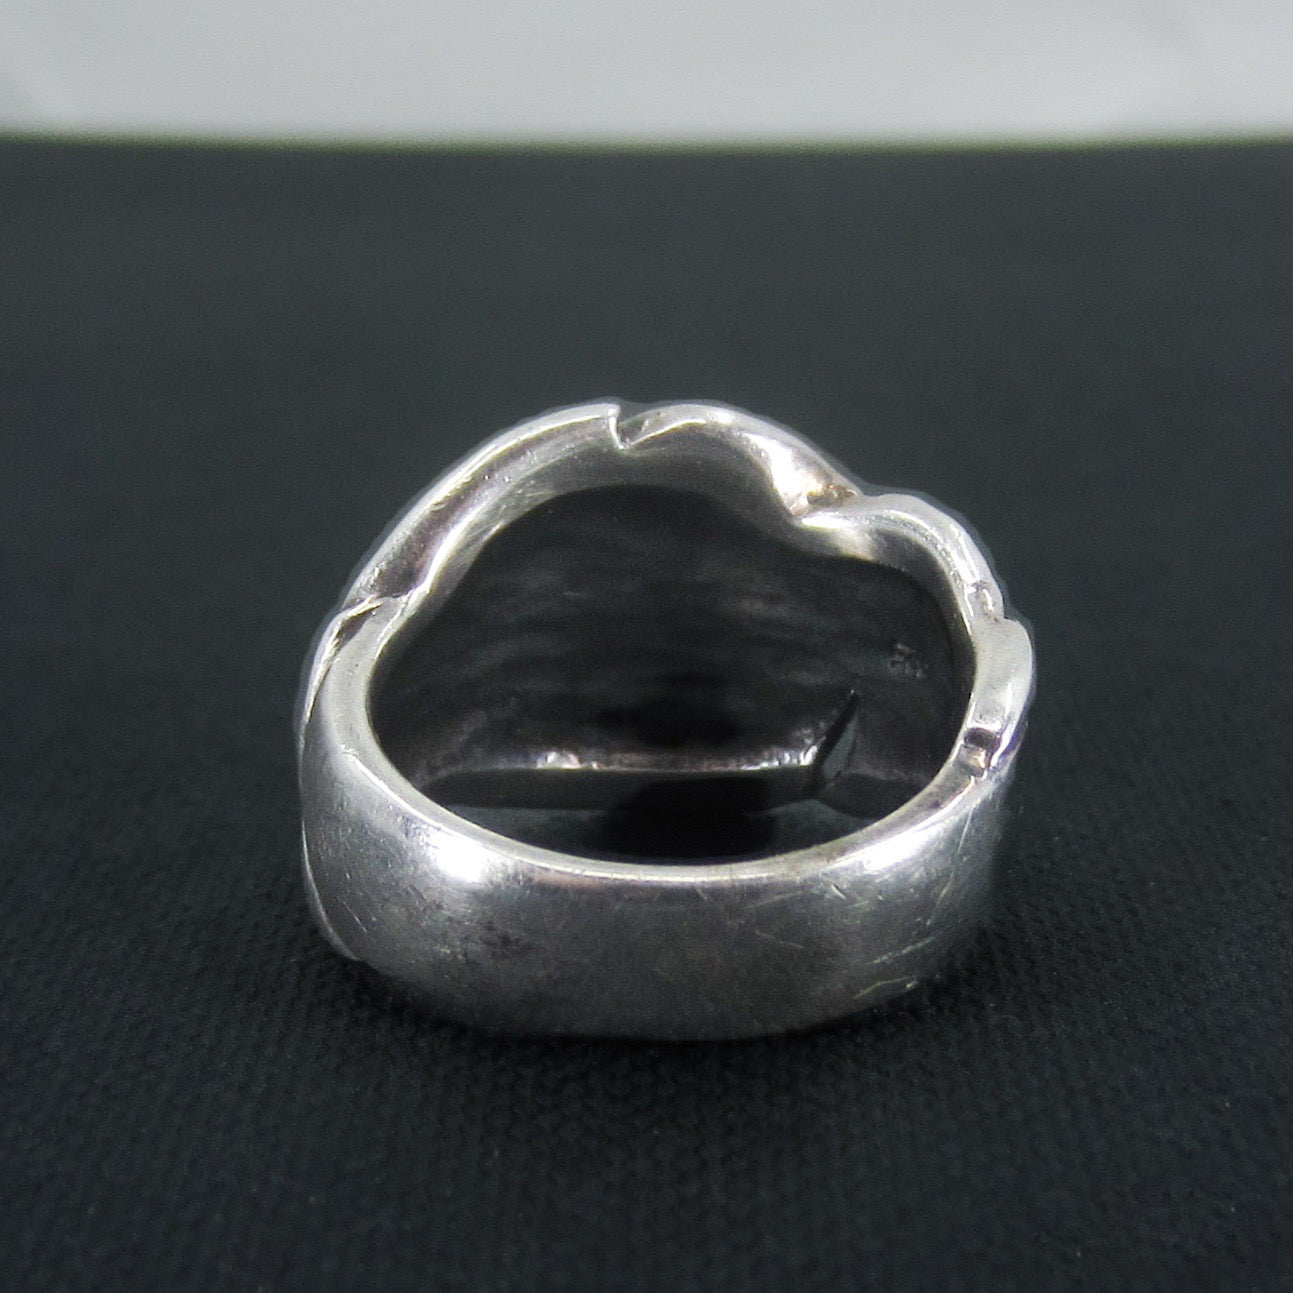 SOLD-Vintage Large Feather Ring Sterling Silver c. 1970